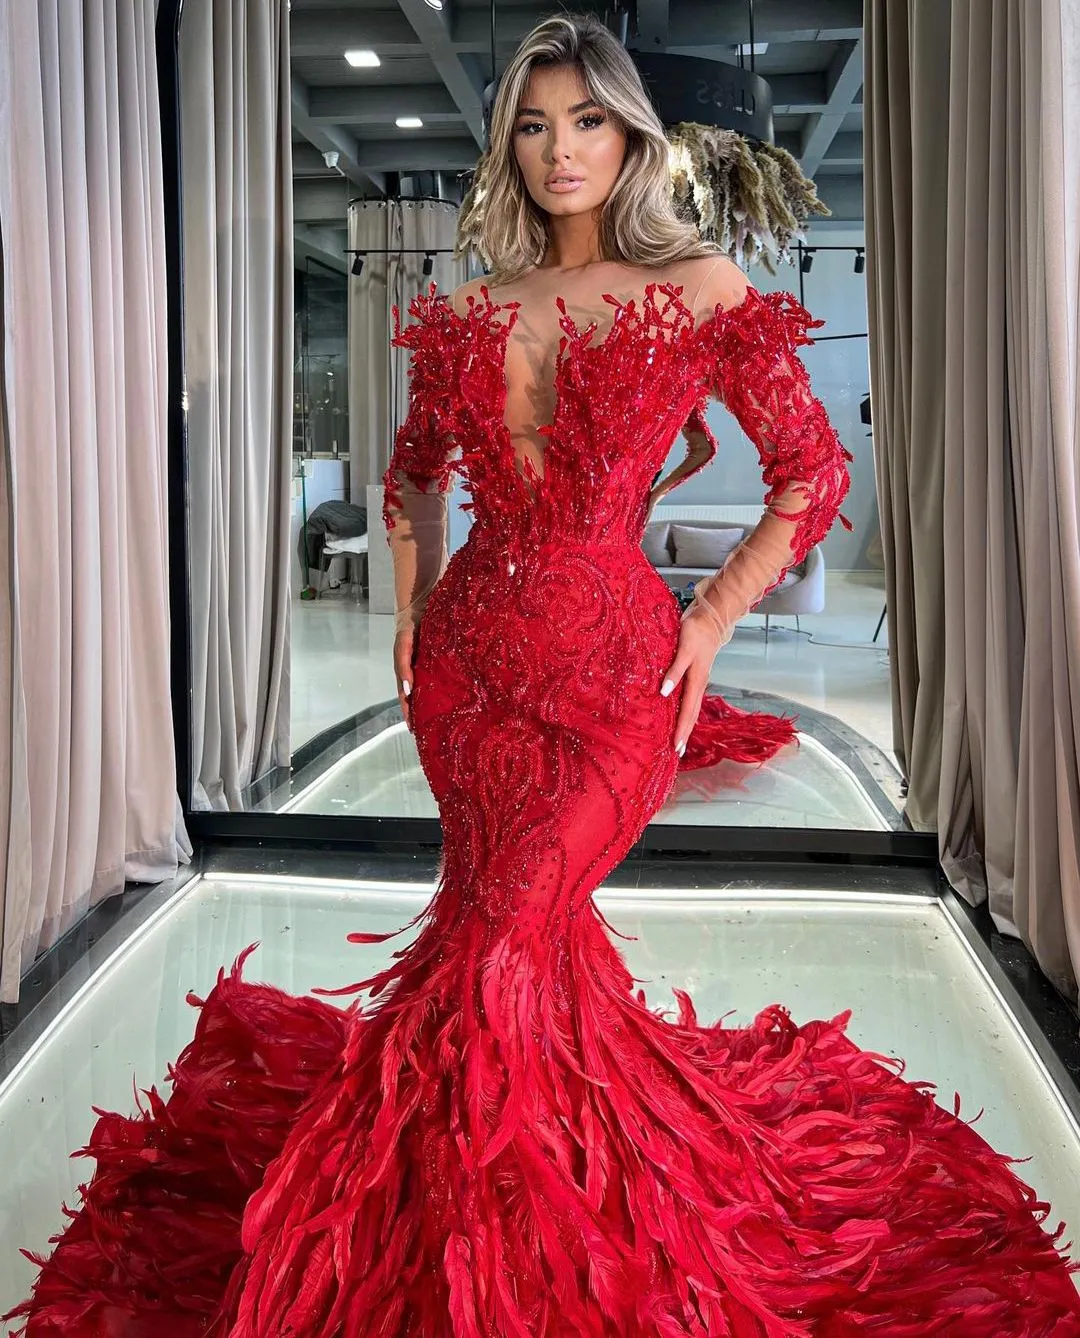 Red Luxury Mermaid Evening Dresses Long Sleeves Deep V Neck Beaded Pearls Appliques Sequins Floor Length Feather Train Prom Dresses Gowns Plus Size Gowns Party Dress